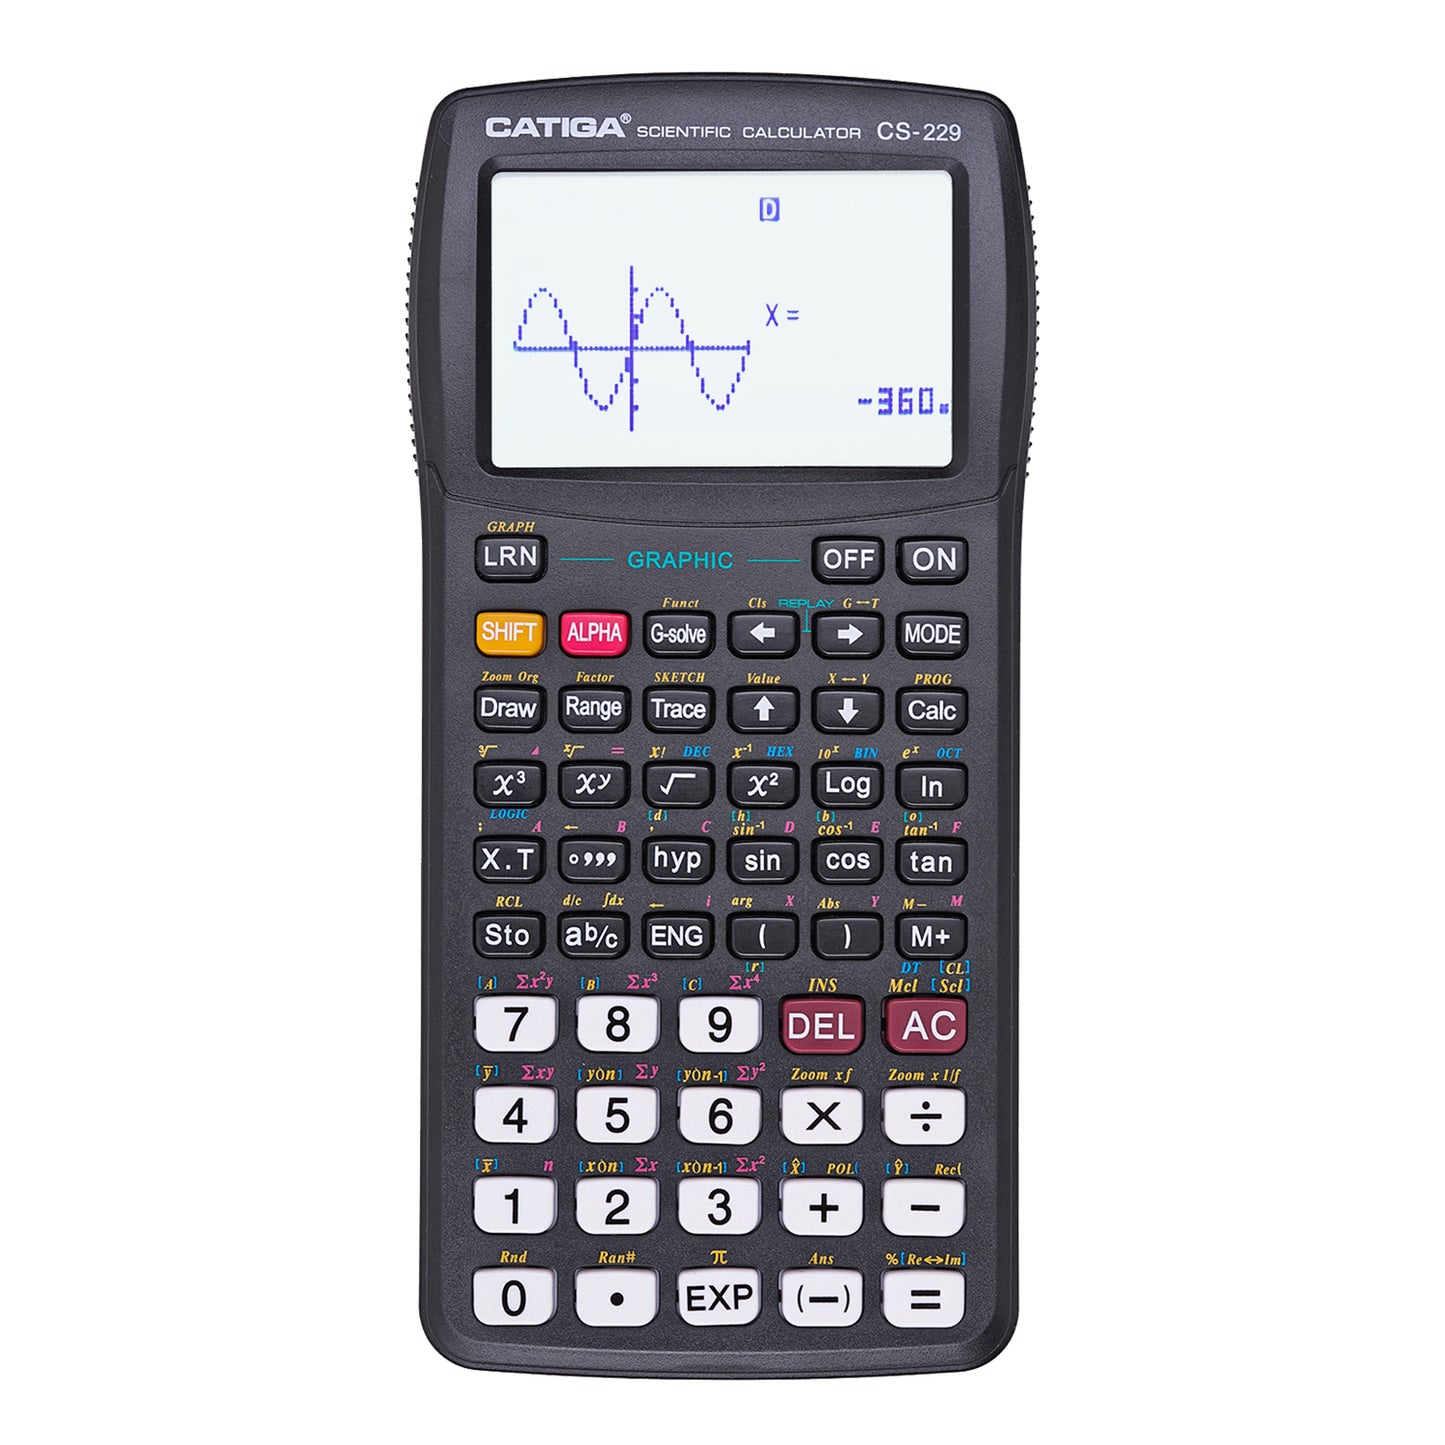 CS-229 Scientific Calculator with Graphic Functions and Multiple Modes (Black)